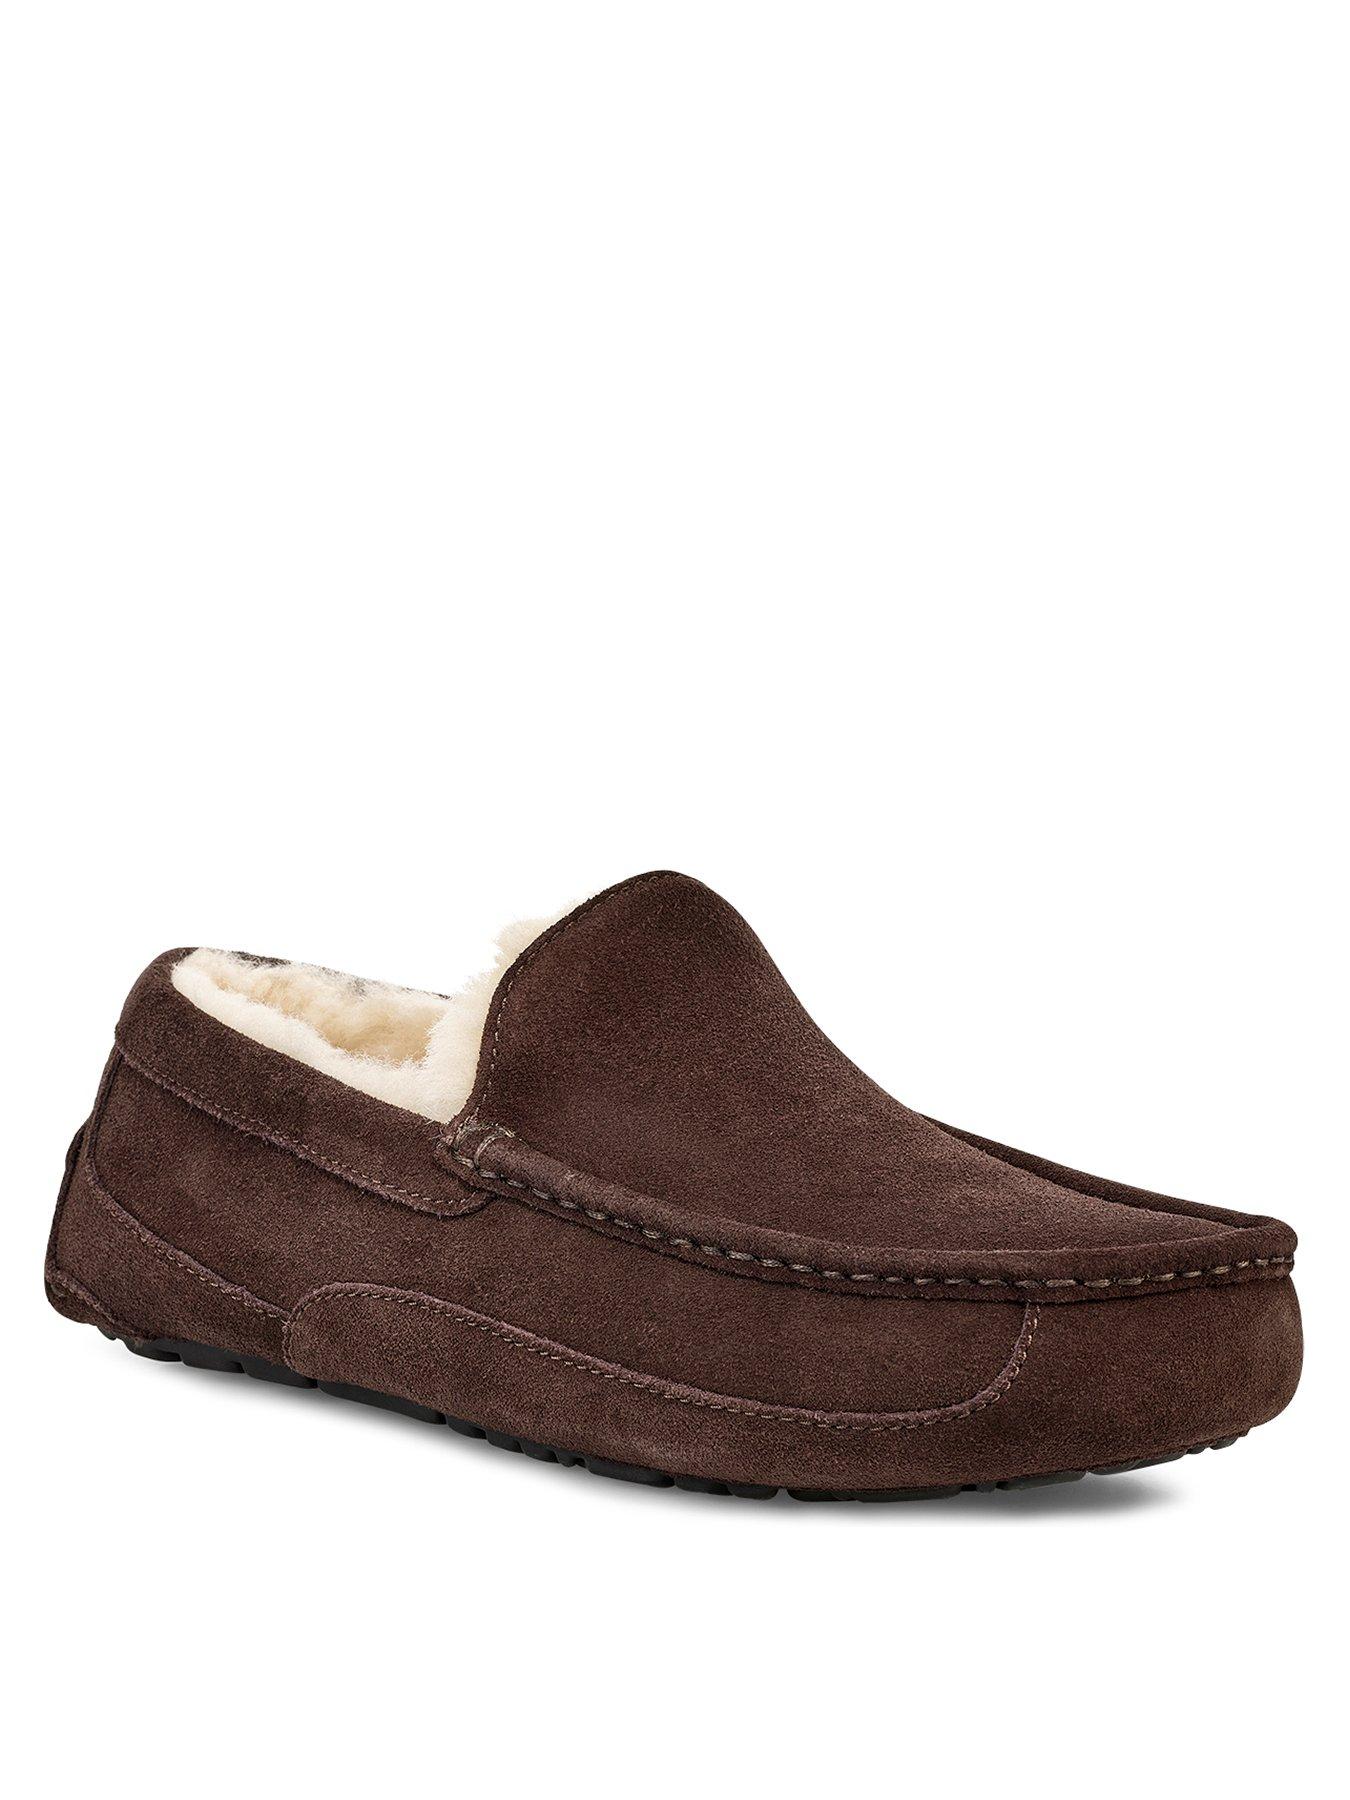 suede mens ugg slippers